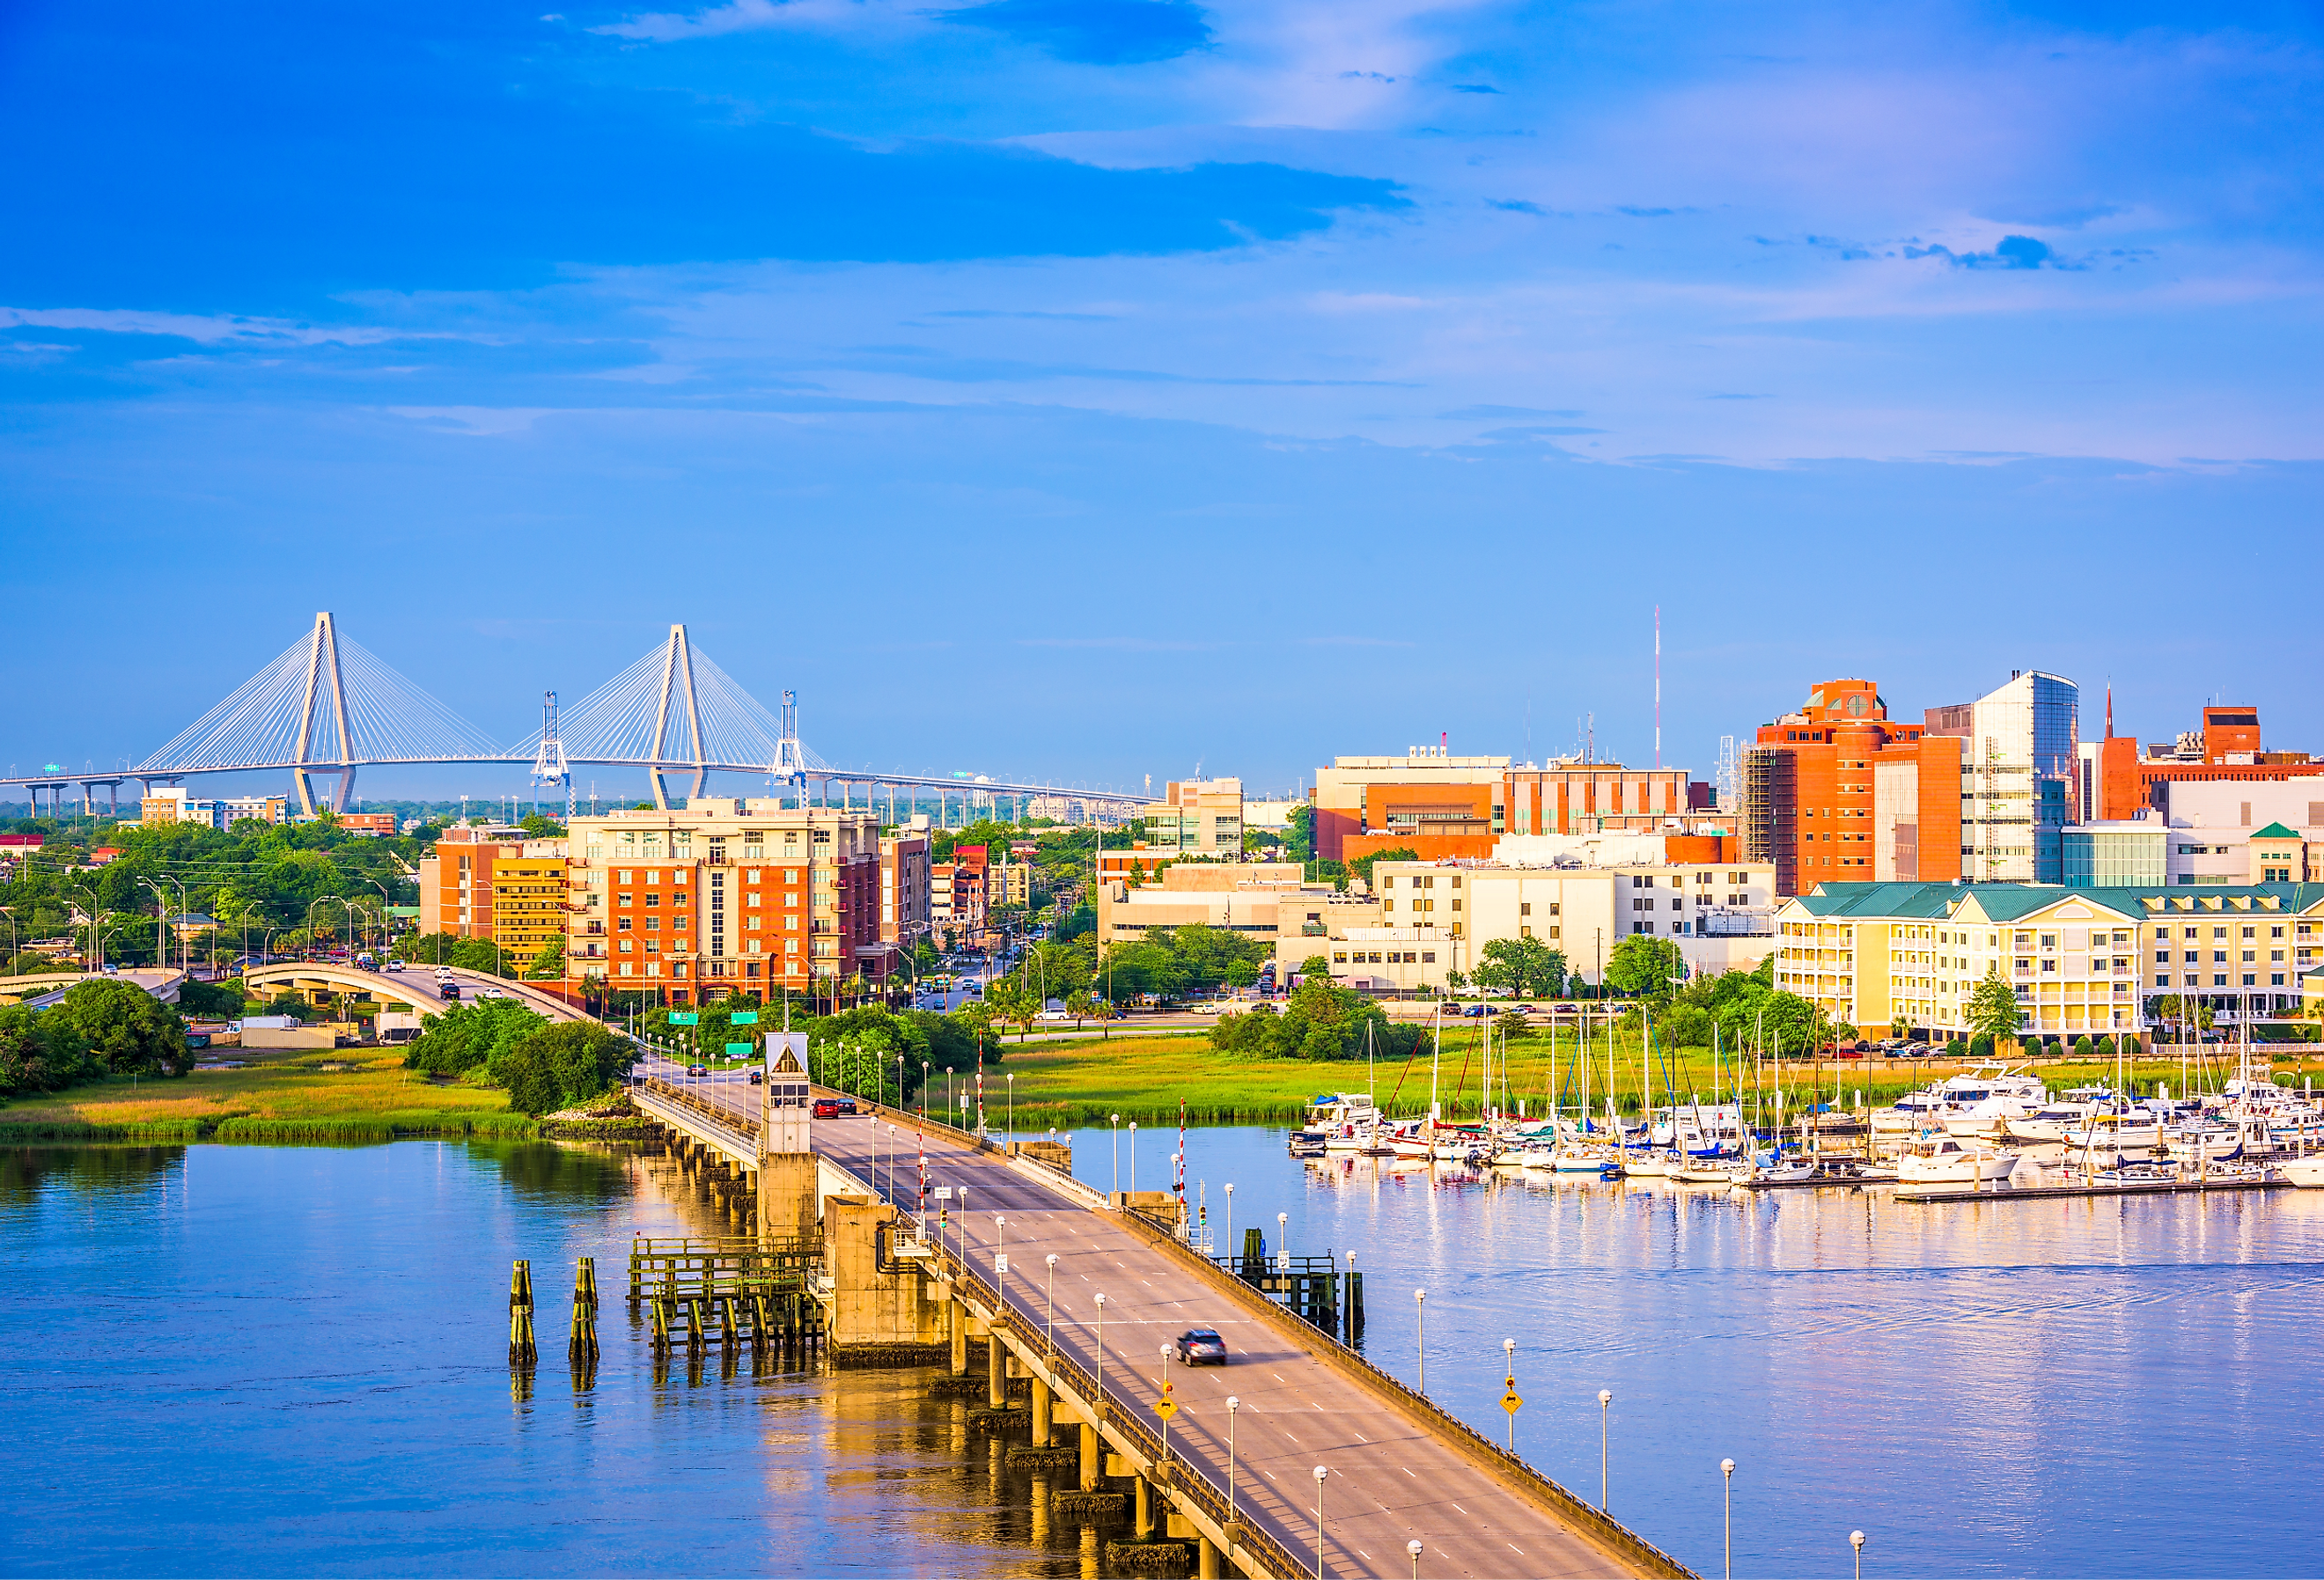 Road over the water by the harbor in Charleston, South Carolina.